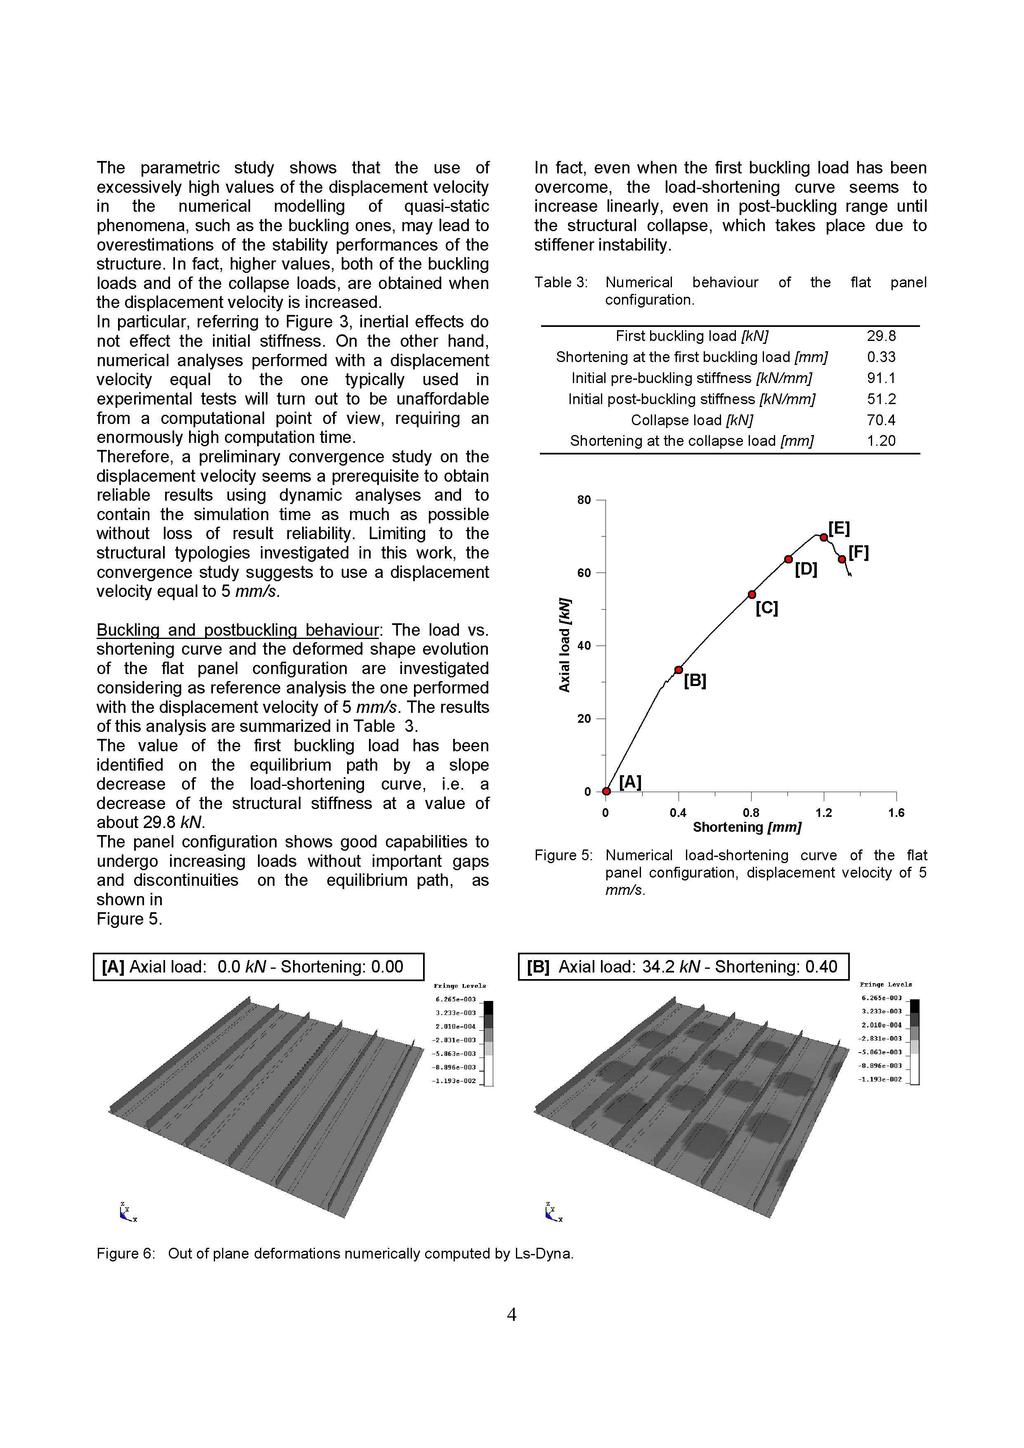 The parametric study shows that the use of excessively high values of the displacement velocity in the numerical modelling of quasi-static phenomena, such as the buckling ones, may lead to